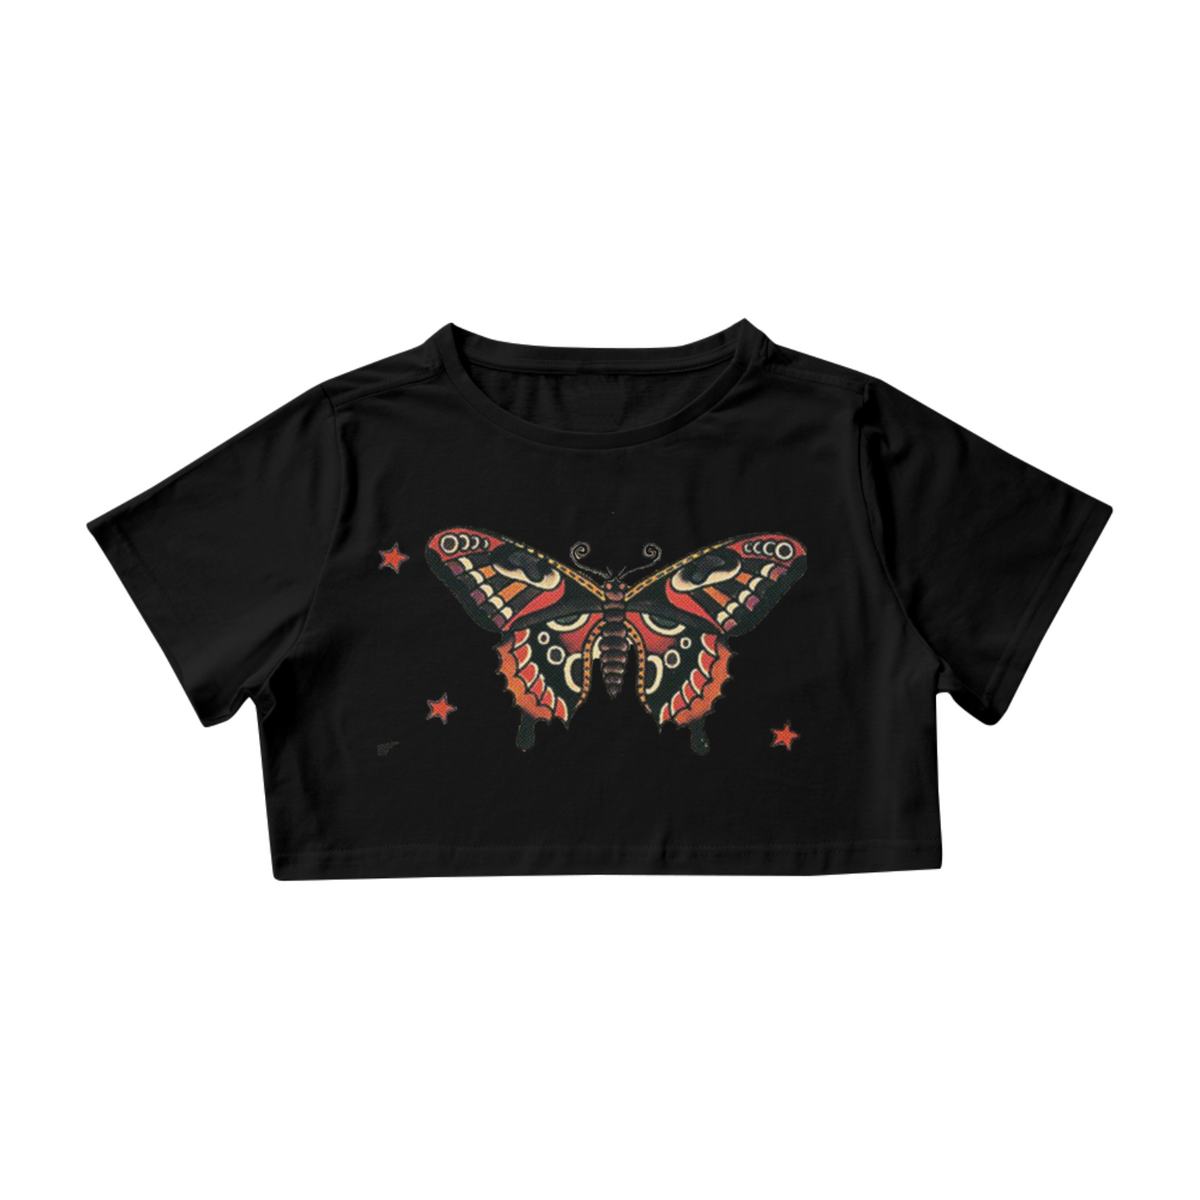 Nome do produto: CROPPED OLD SCHOOL BUTTERFLY